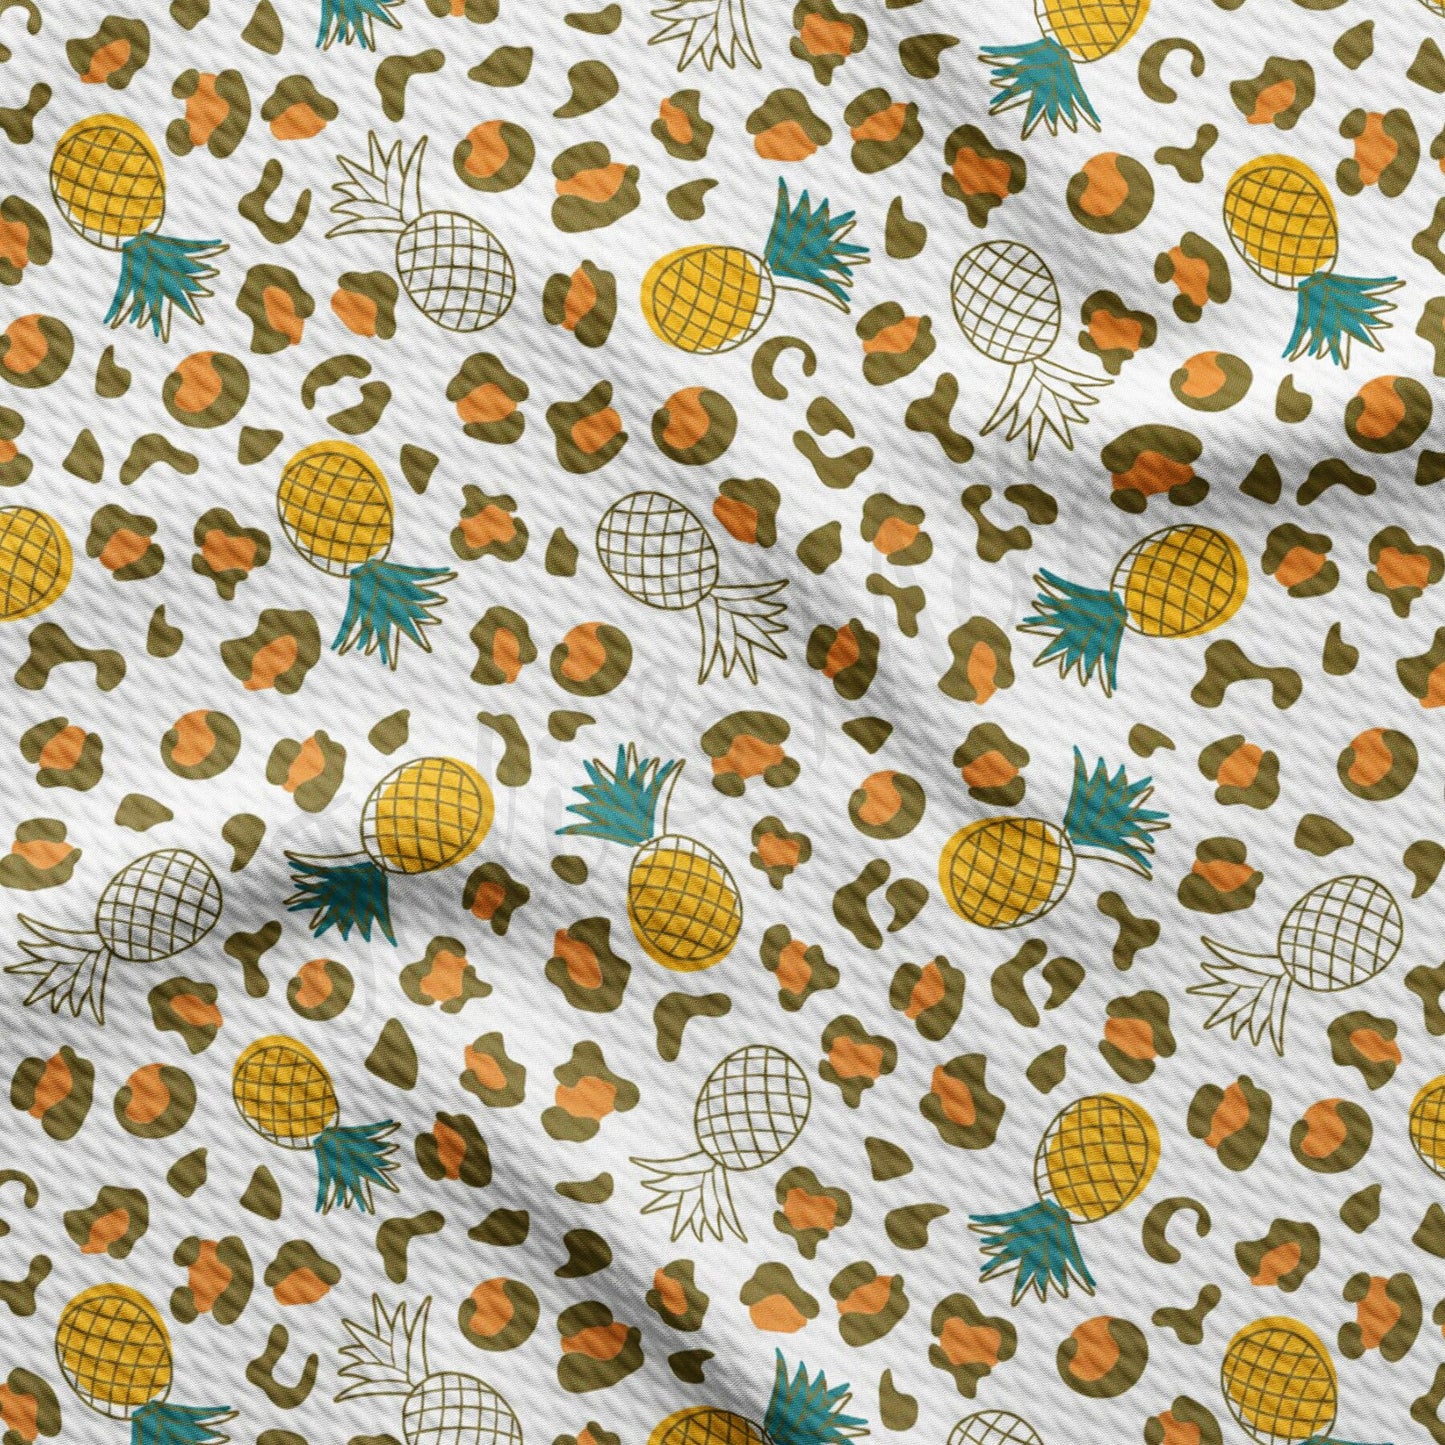 Pineapple Cheetah Leopard Summer  Bullet Textured Fabric by the yard AA1615